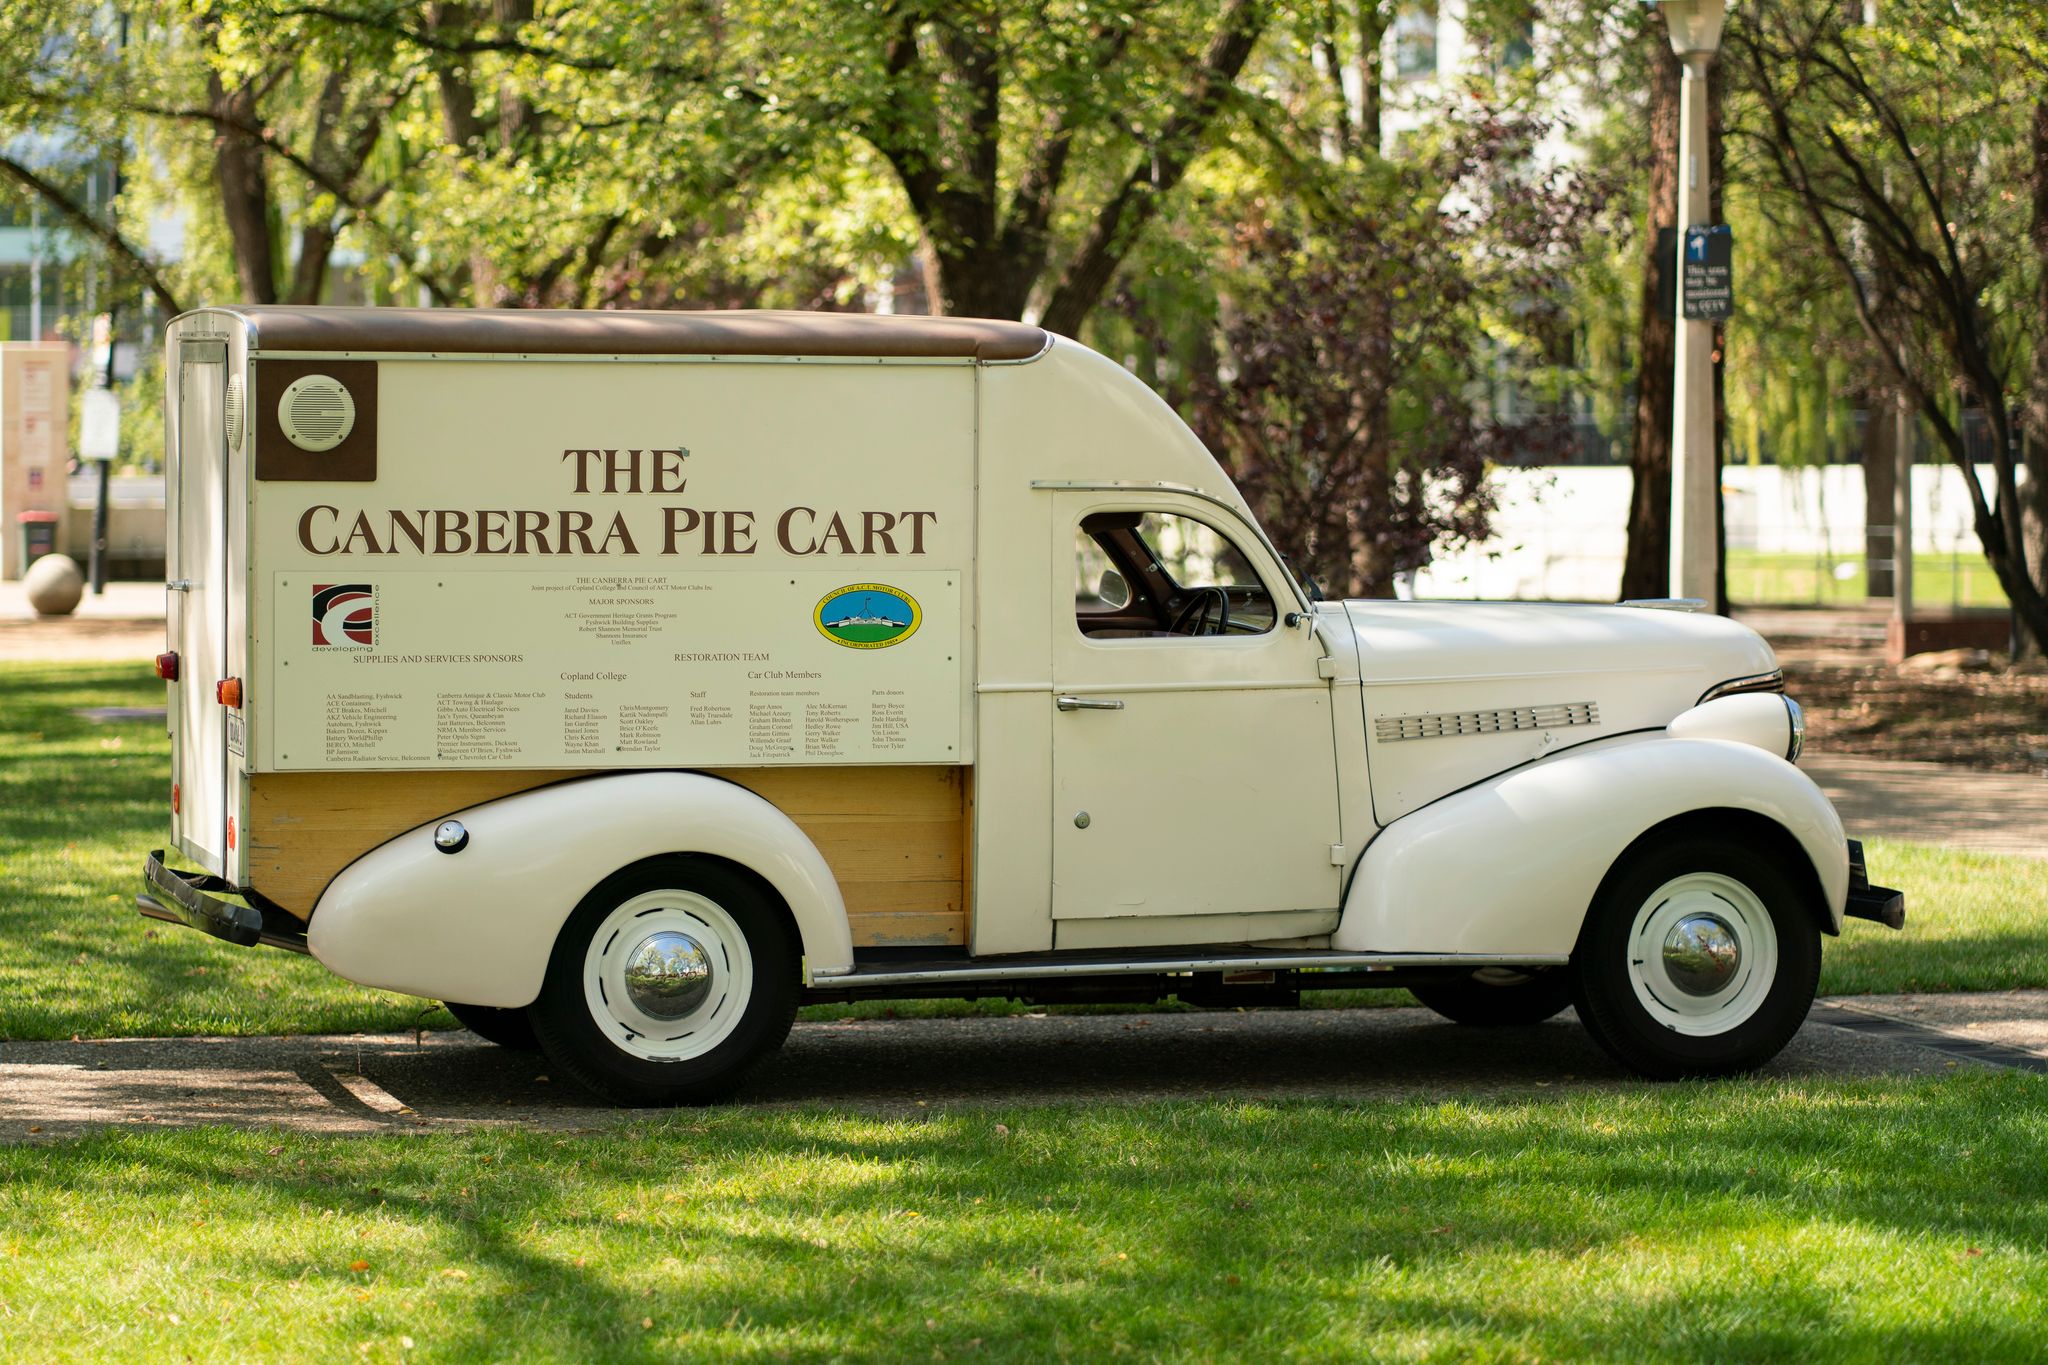 Photo by Martin Ollman of the Canberra Pie Cart at Kambri (ANU) February 2020